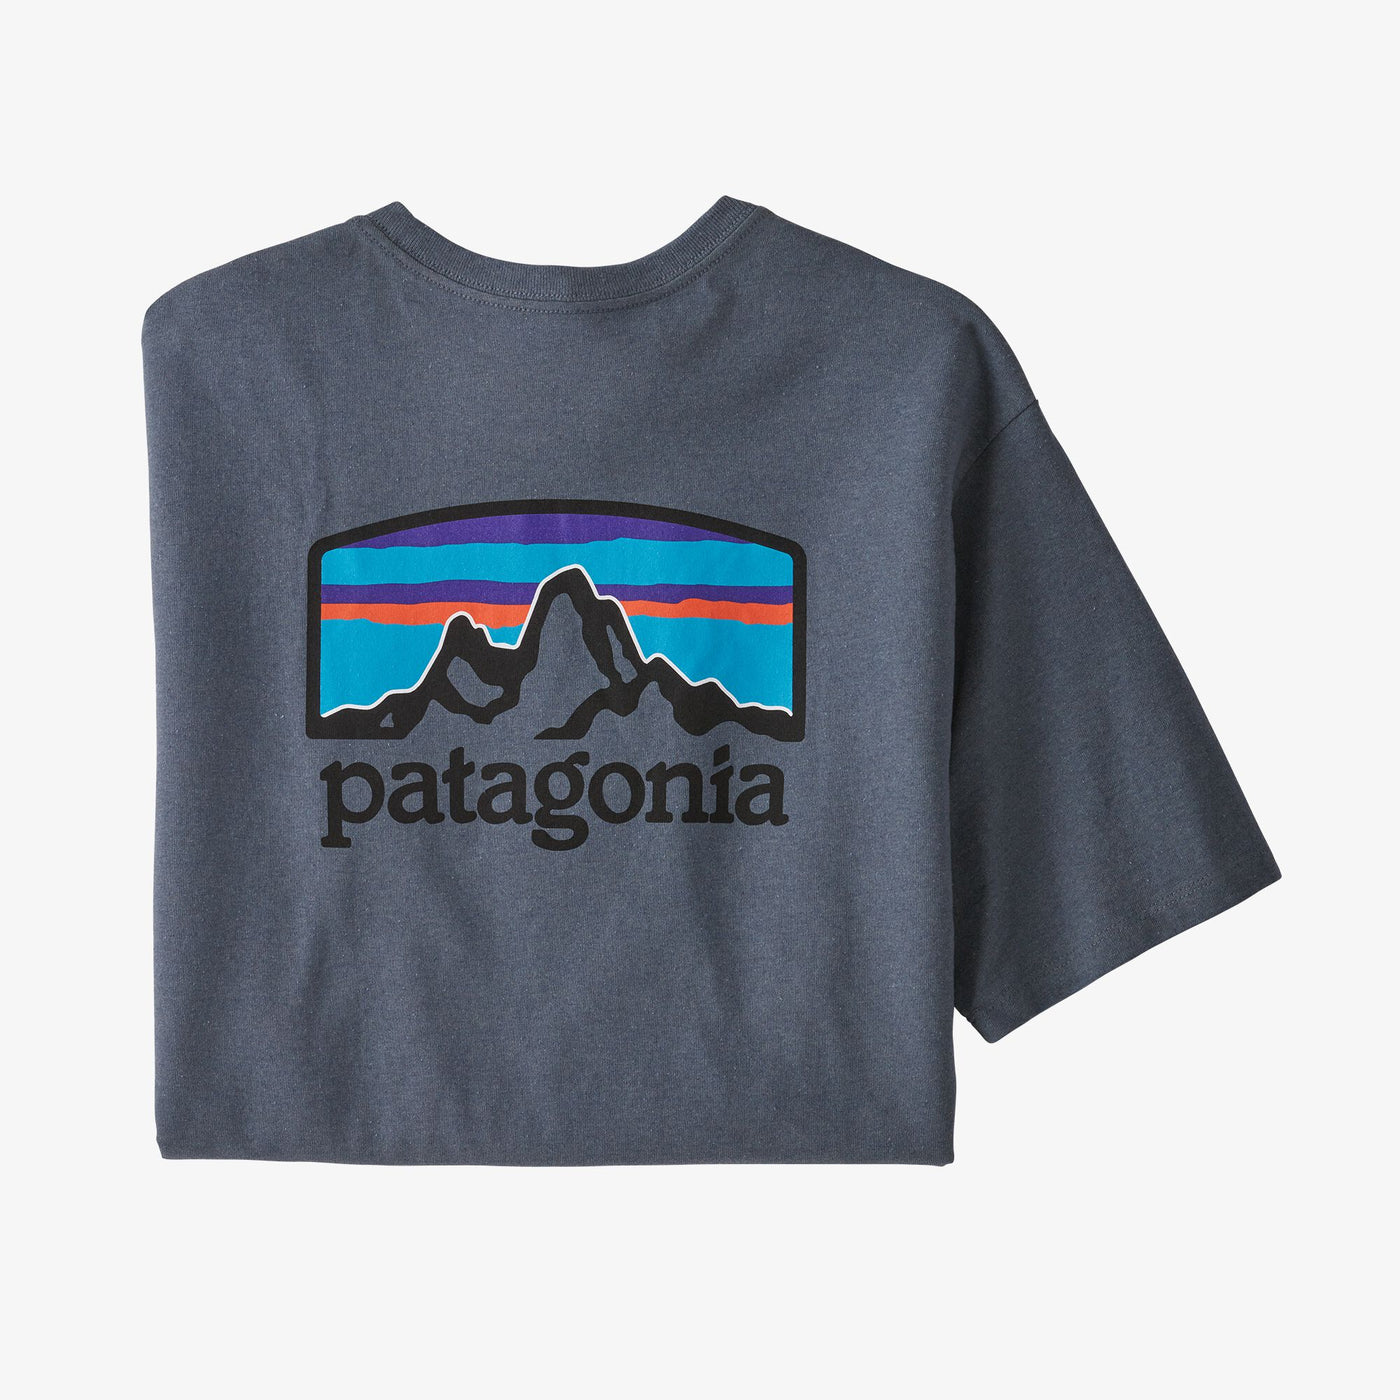 Patagonia Men's Fitz Roy Horizons Responsibili-Tee-Men's Clothing-Plume Gray-S-Kevin's Fine Outdoor Gear & Apparel